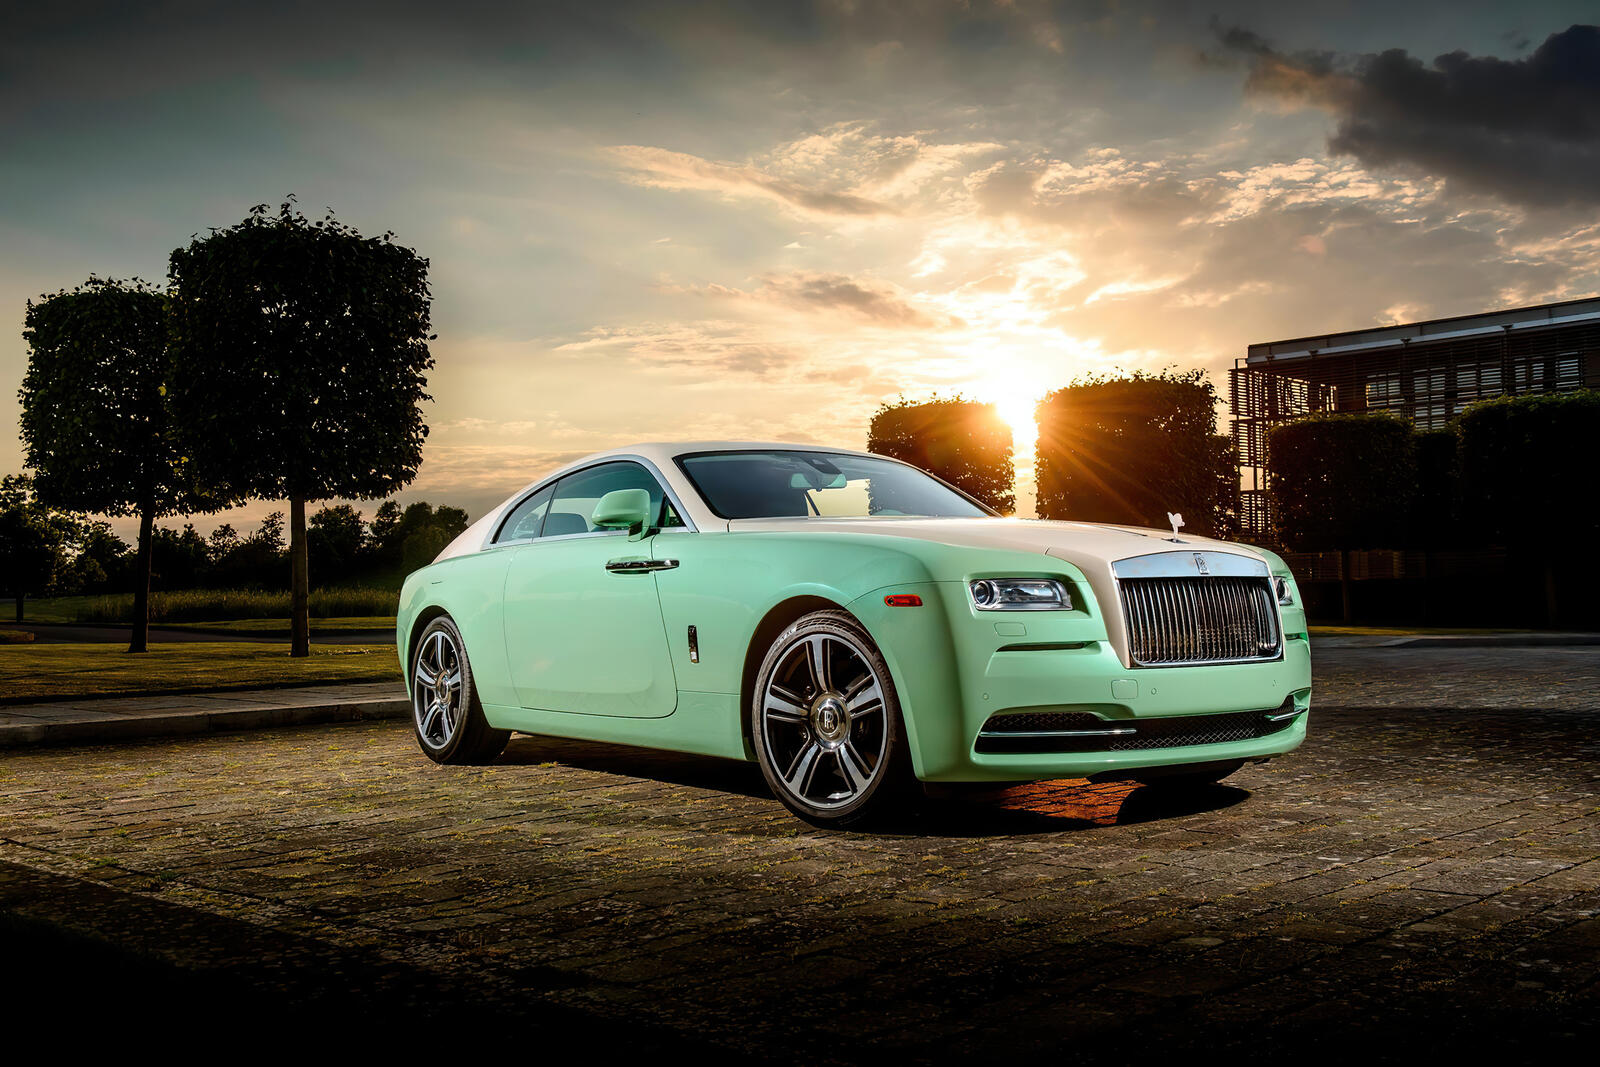 Free photo Rolls Royce Wraith in an unusual color.